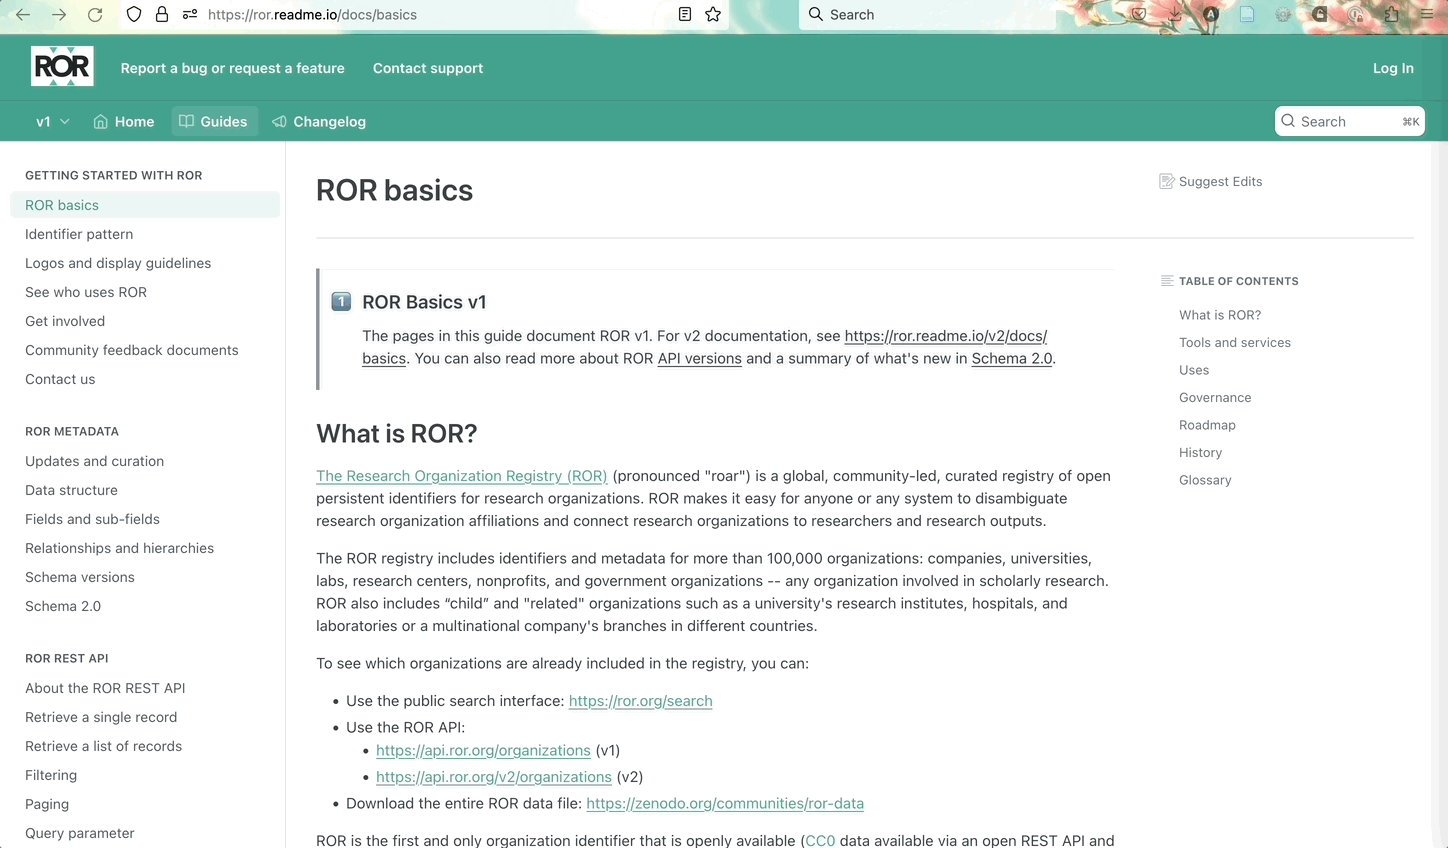 How to switch between version 1 and version 2 of ROR documentation